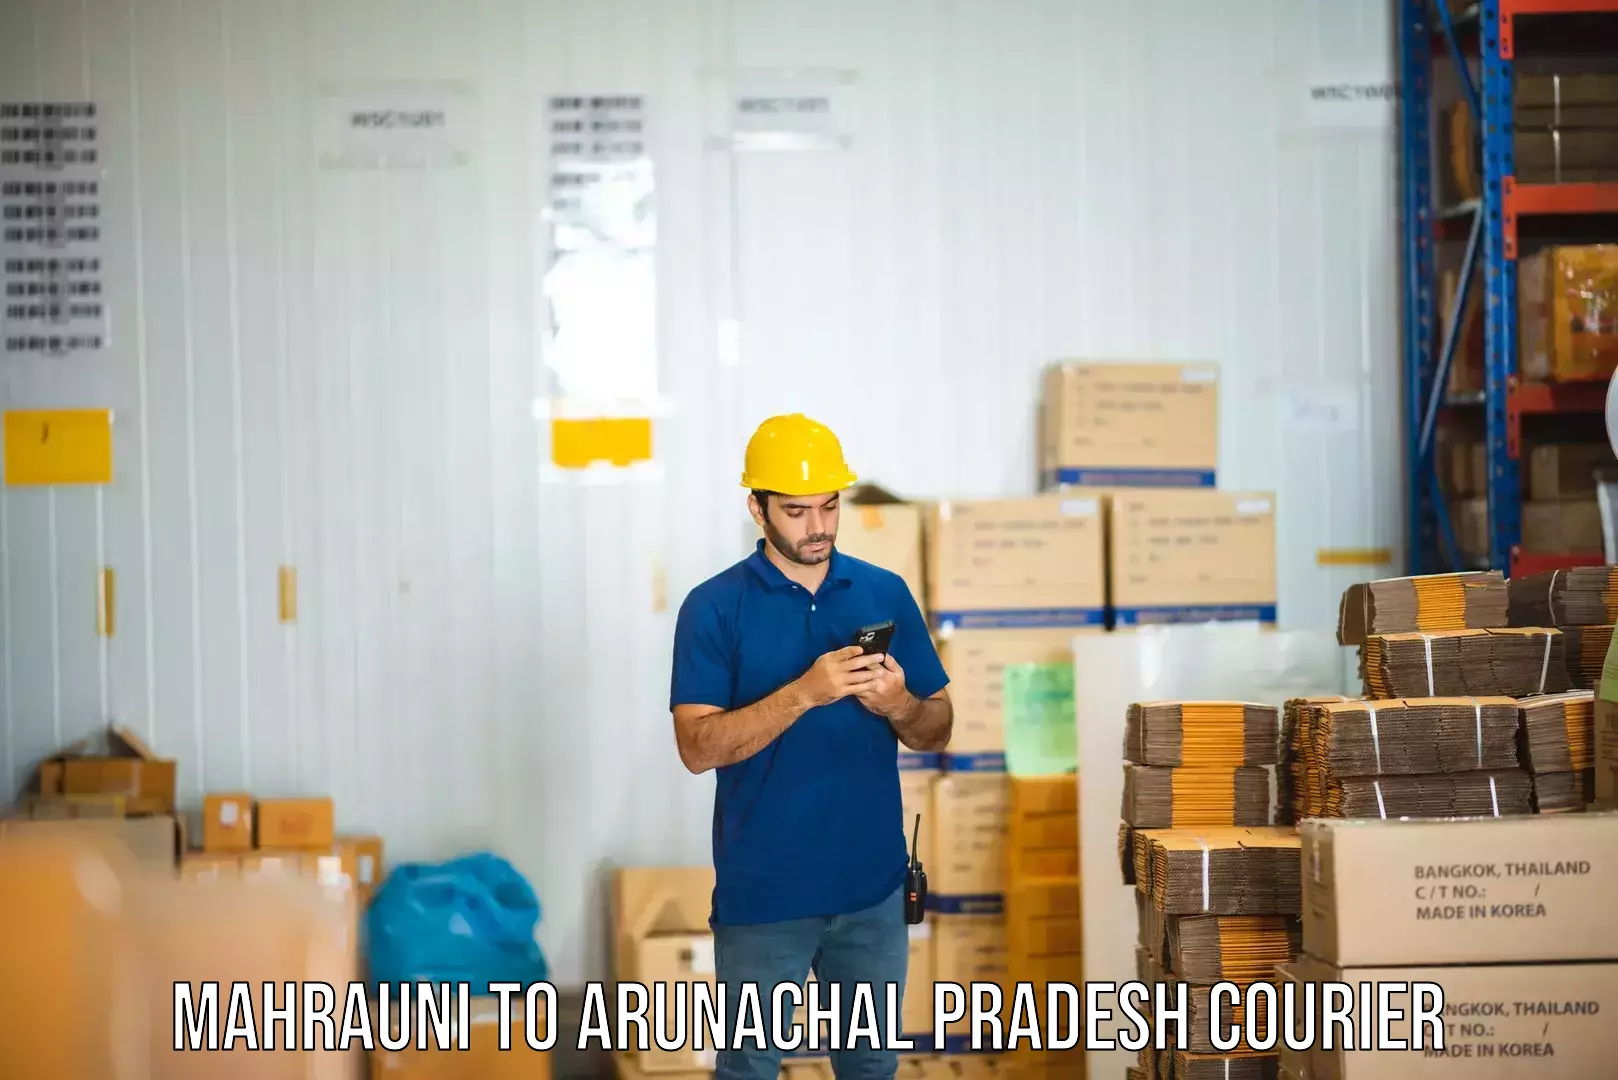 Automated parcel services Mahrauni to Lohit